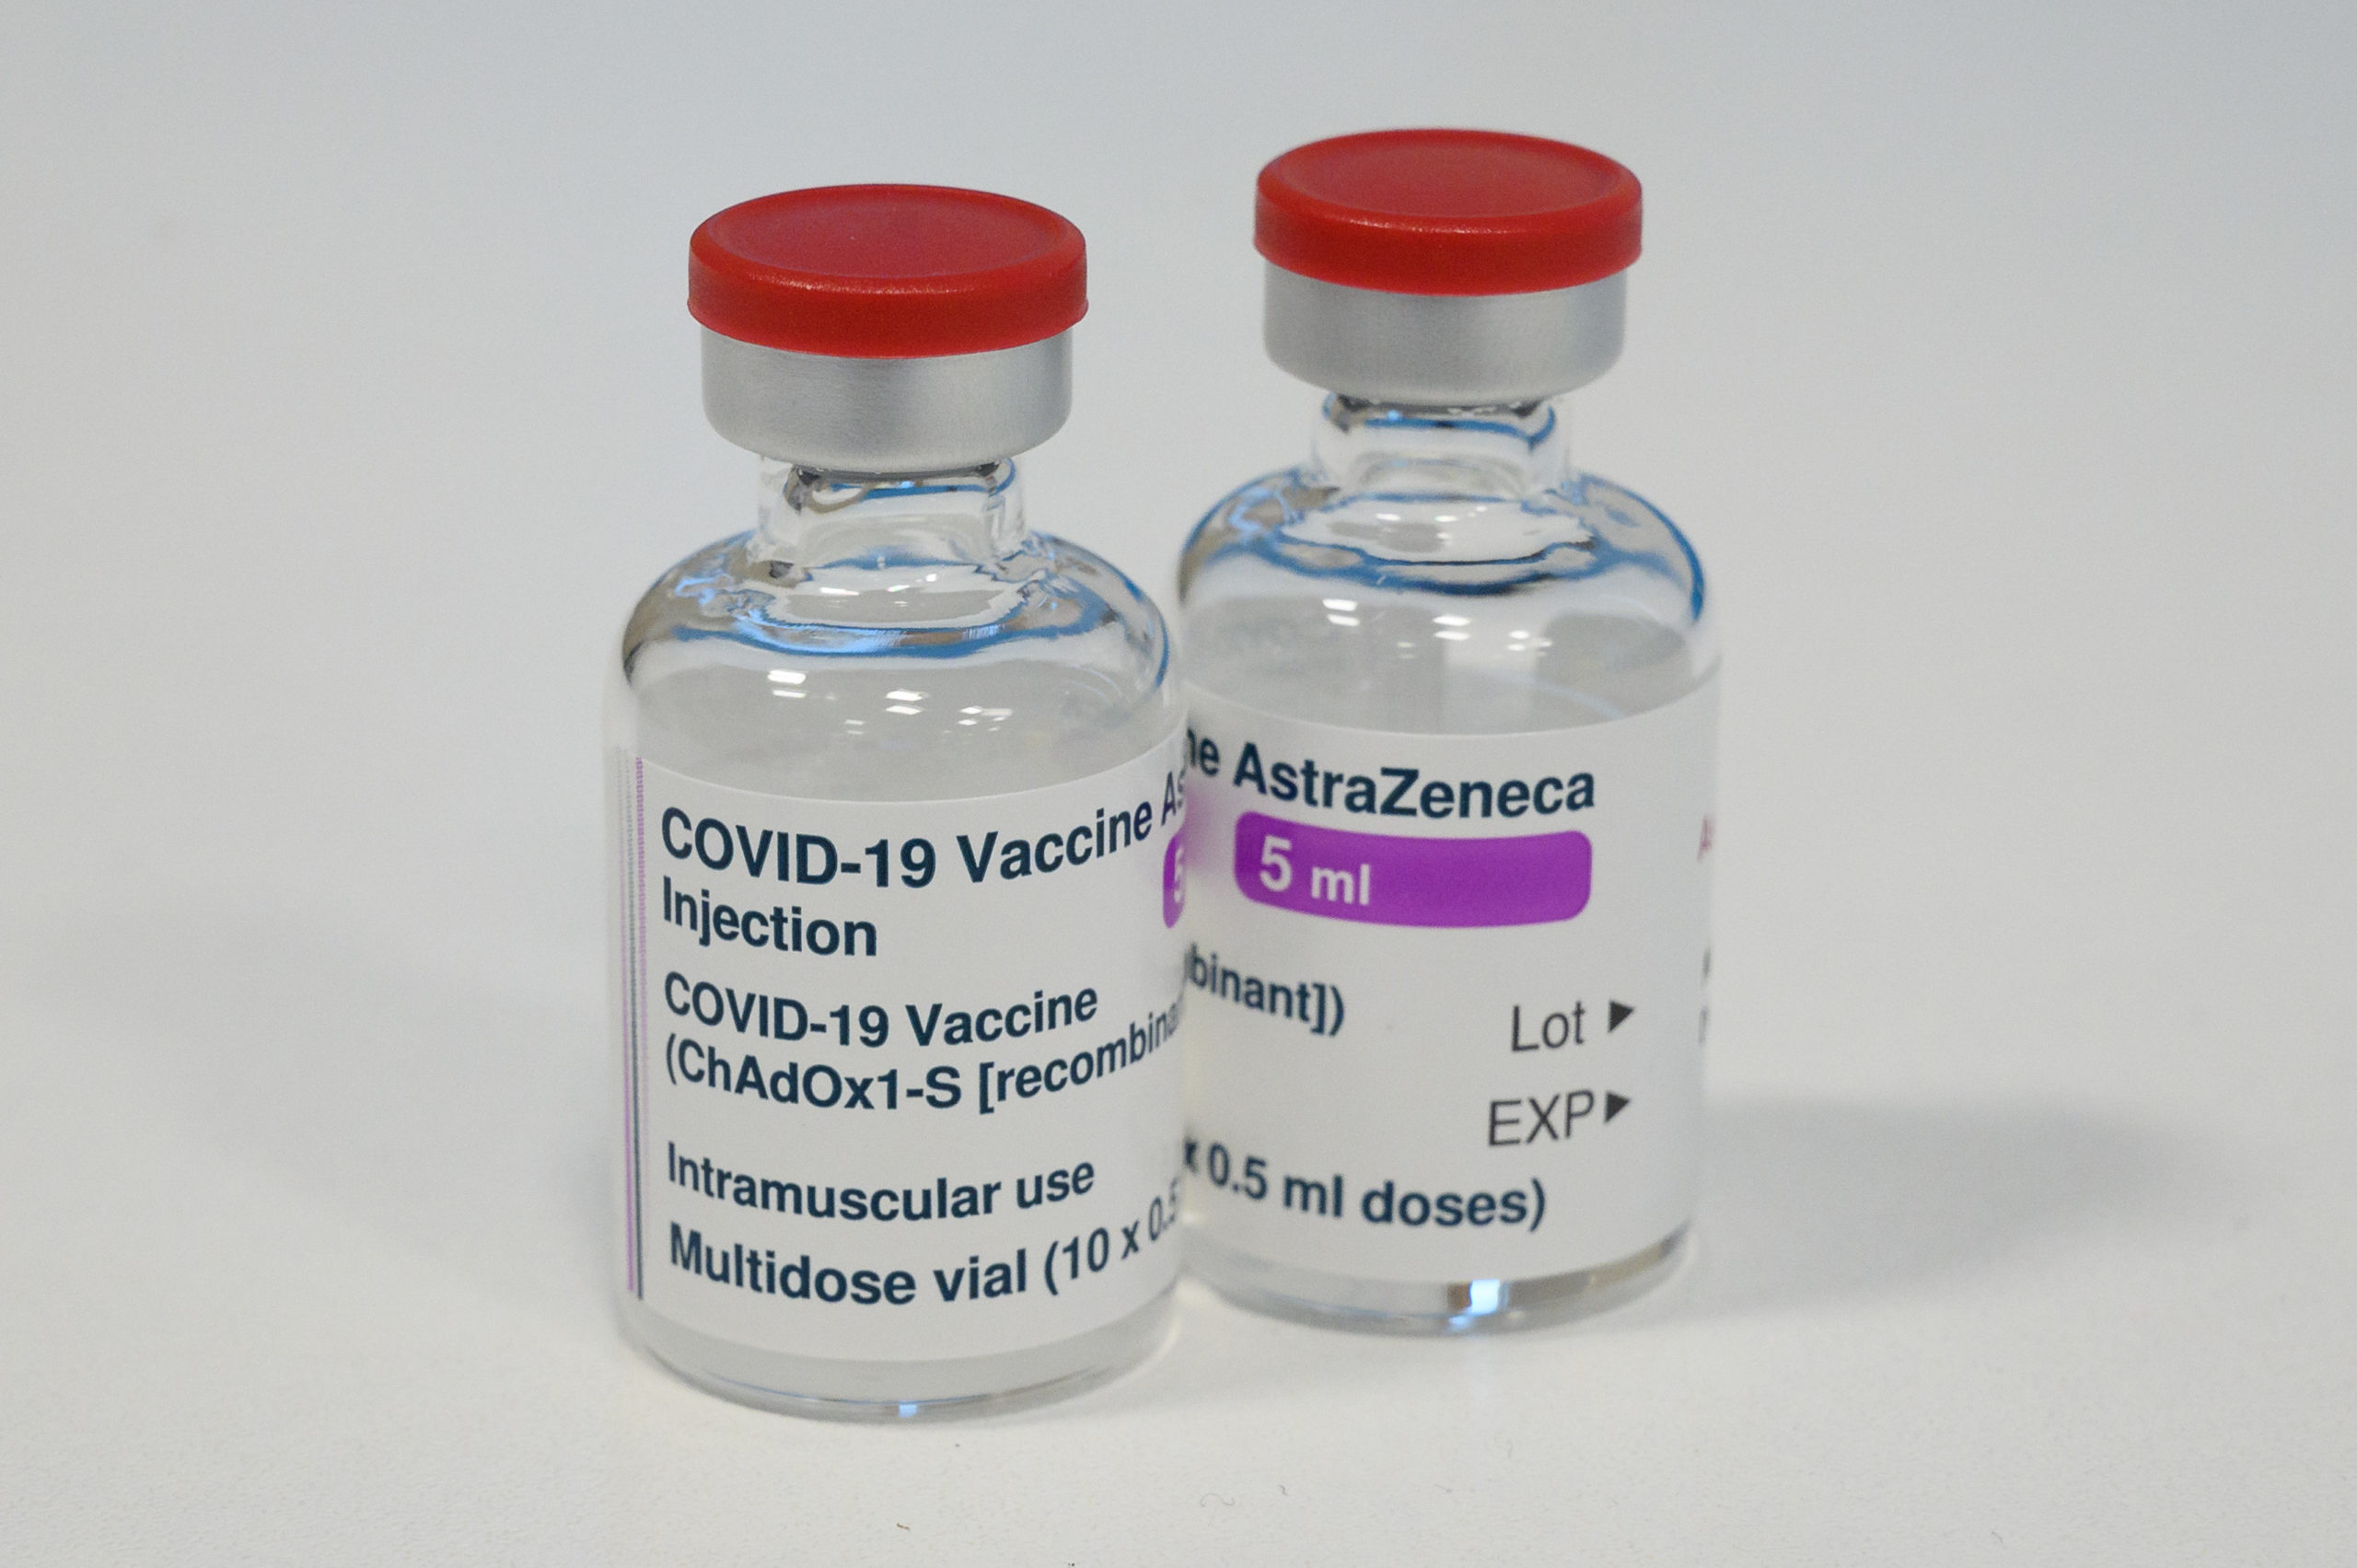 LONDON, ENGLAND - JANUARY 07: Vials of the AstraZeneca COVID-19 vaccine are seen at the Sir Ludwig Guttmann Building on January 07, 2021 in London, England. The UK aims to vaccinate all over-70s, front-line health workers, and the most clinically vulnerable by mid February, when its current lockdown rules will be reviewed. That would require around 13 million covid-19 vaccinations. As of Tuesday, the country had vaccinated more than 1.3 million people. (Photo by Leon Neal/Getty Images)